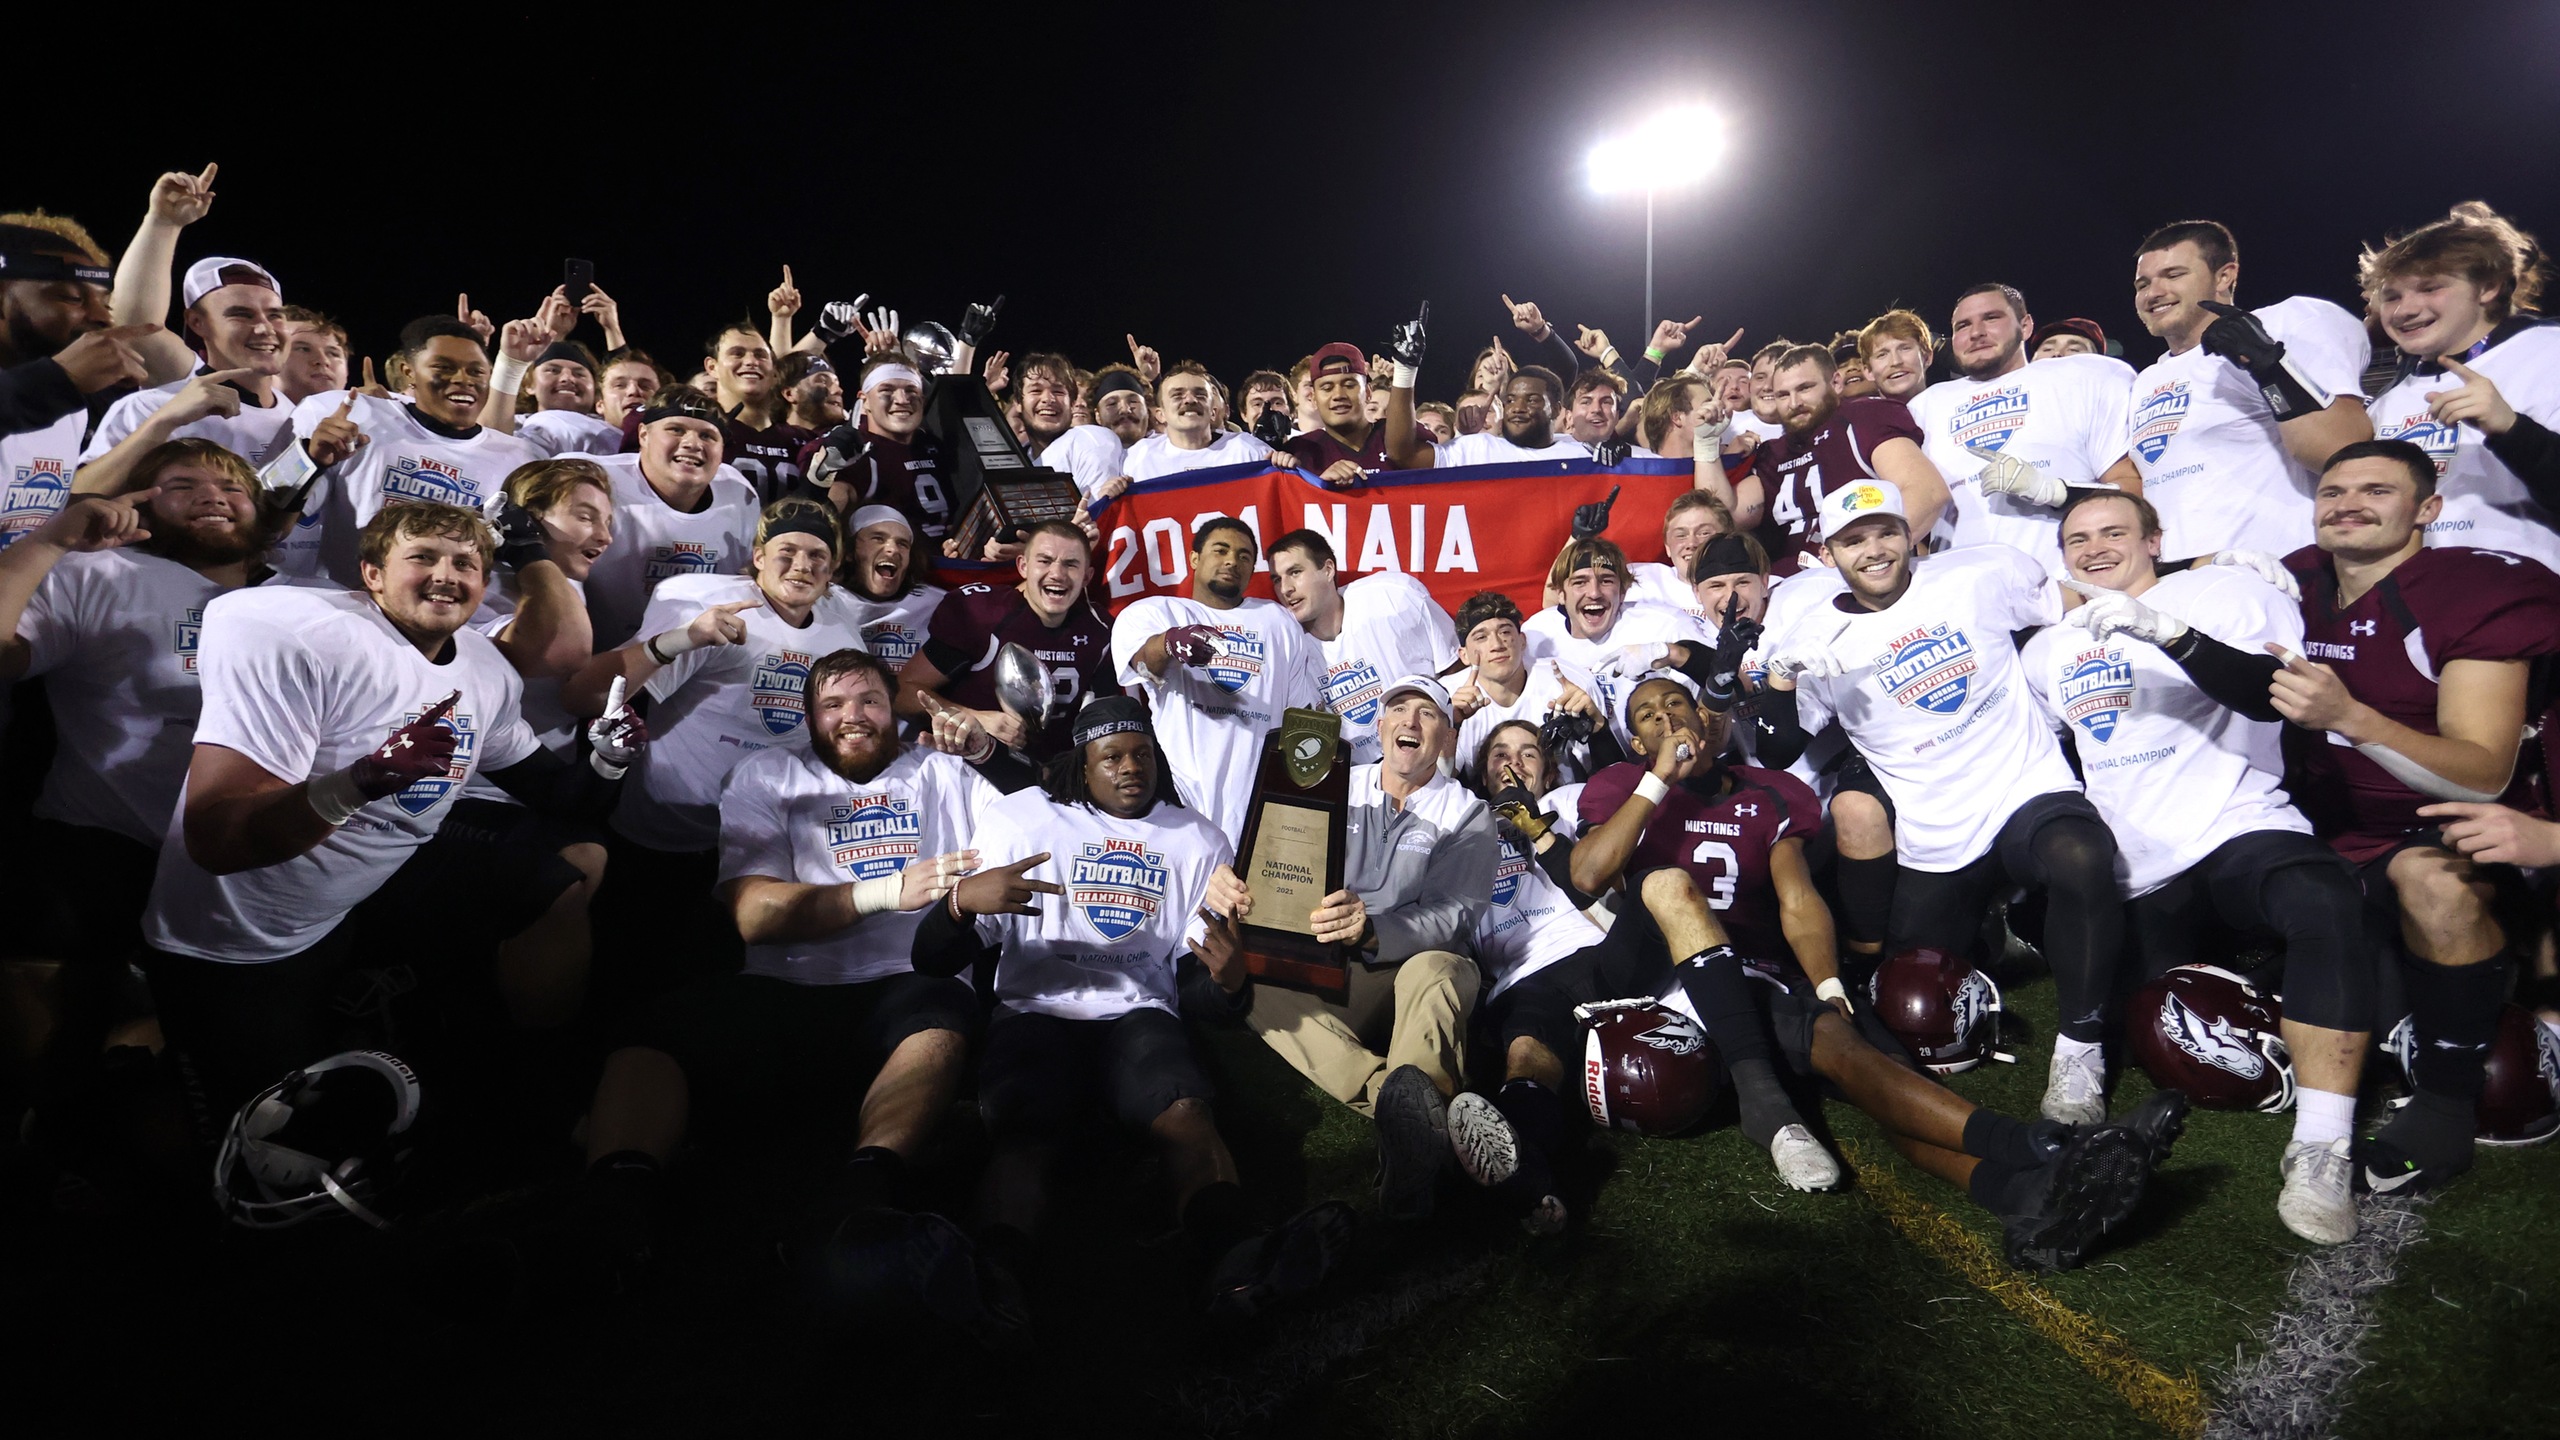 Morningside Wins Third NAIA National Championship in Last Four Years